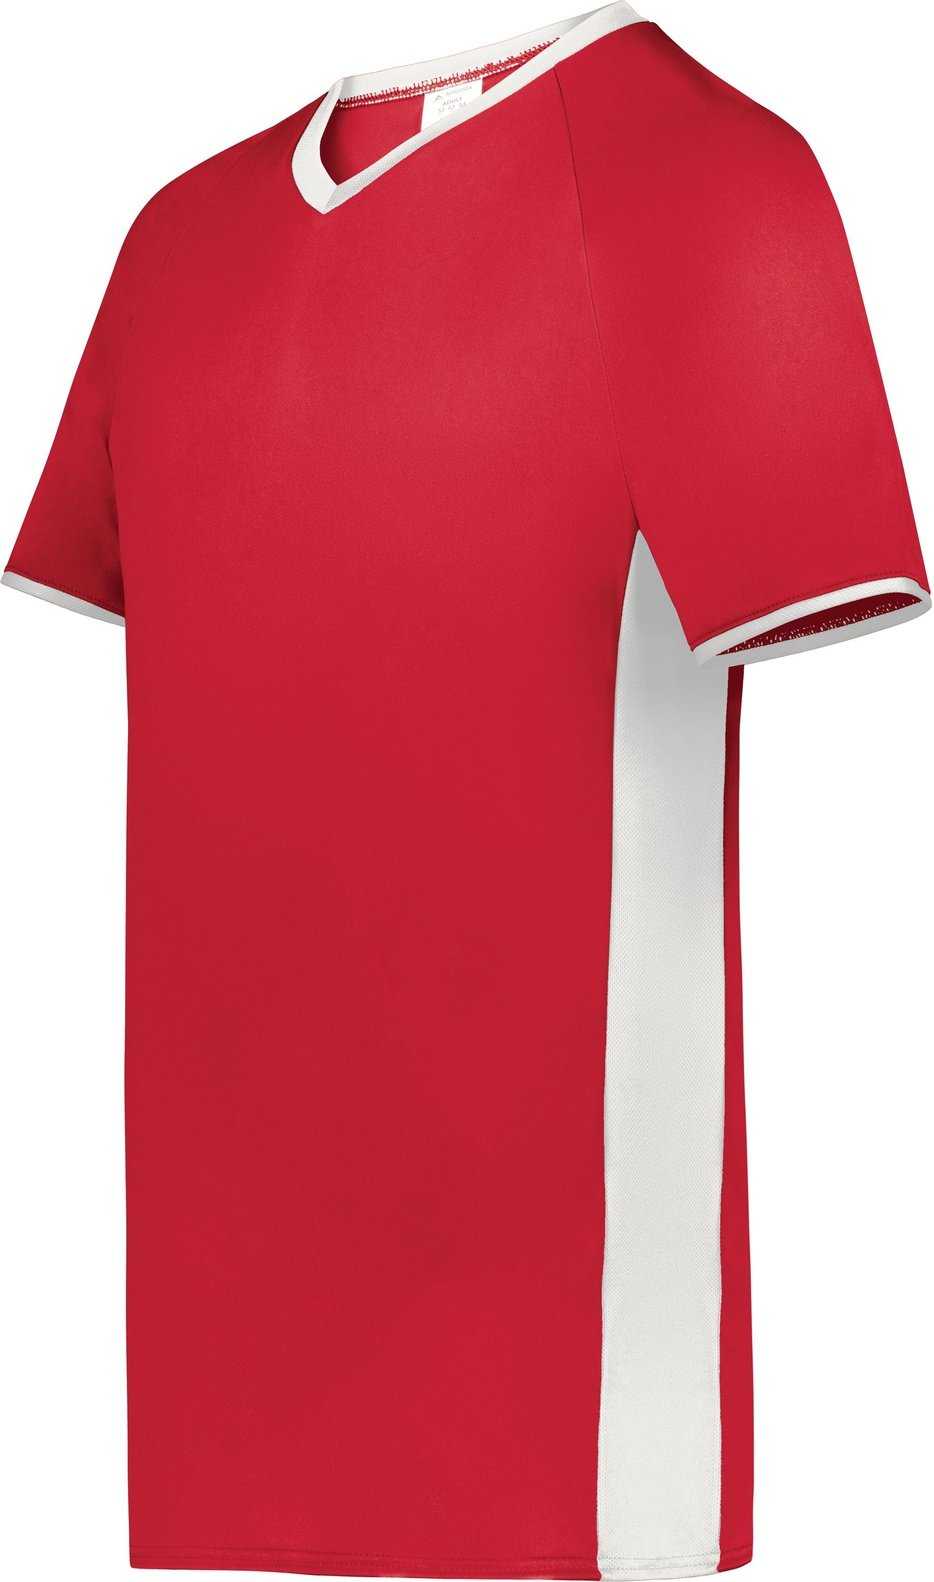 Augusta 6907 Cutter+ V-Neck Jersey - Scarlet White - HIT a Double